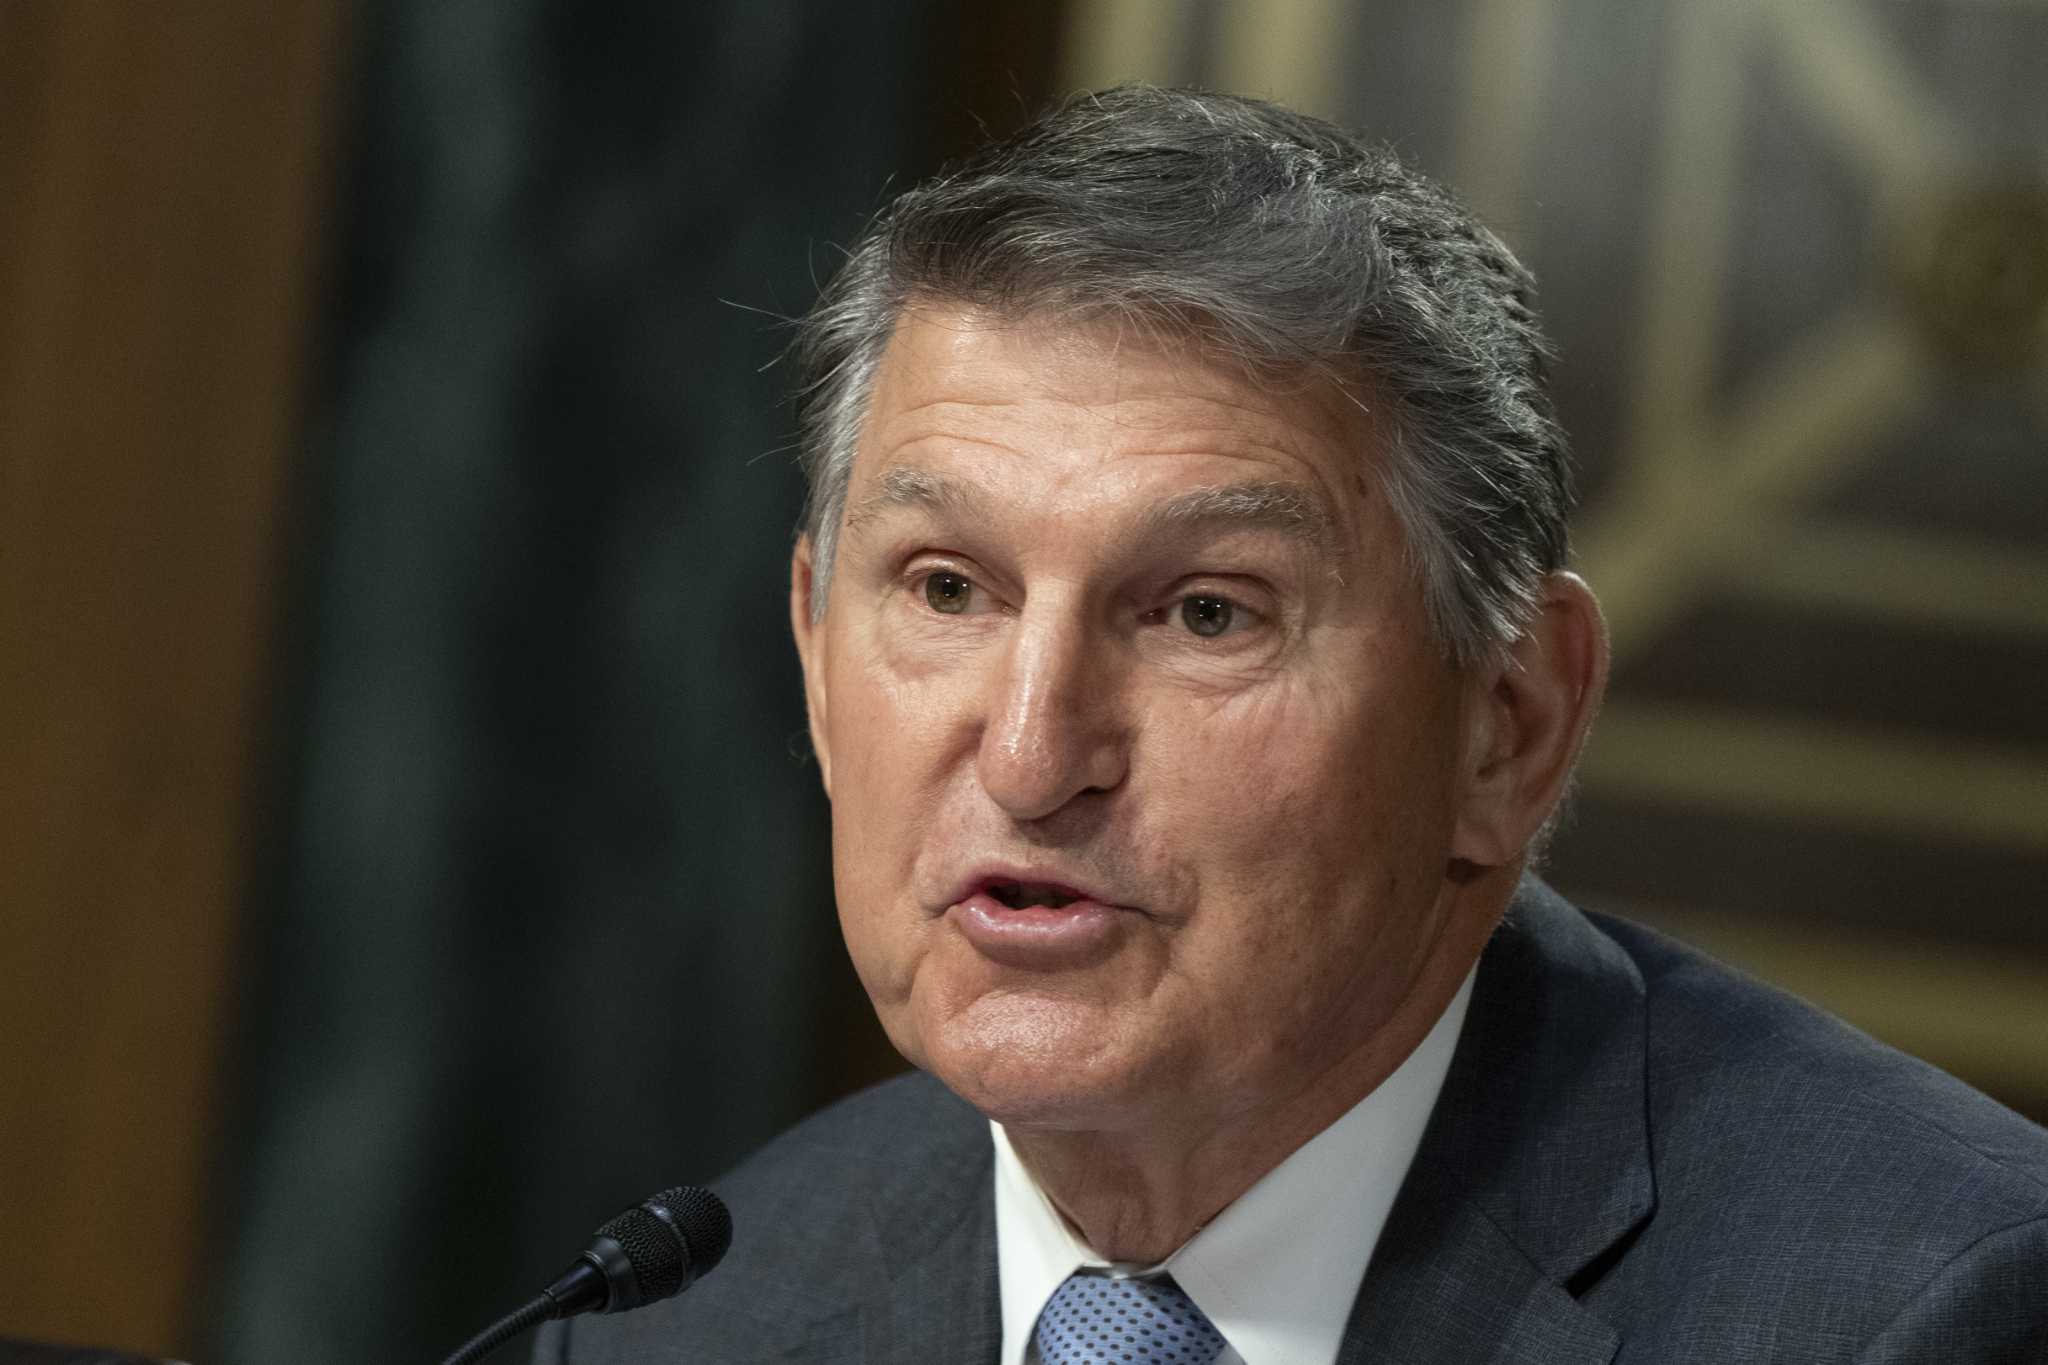 Democratic Sen. Joe Manchin of West Virginia registers as independent, citing 'partisan extremism'